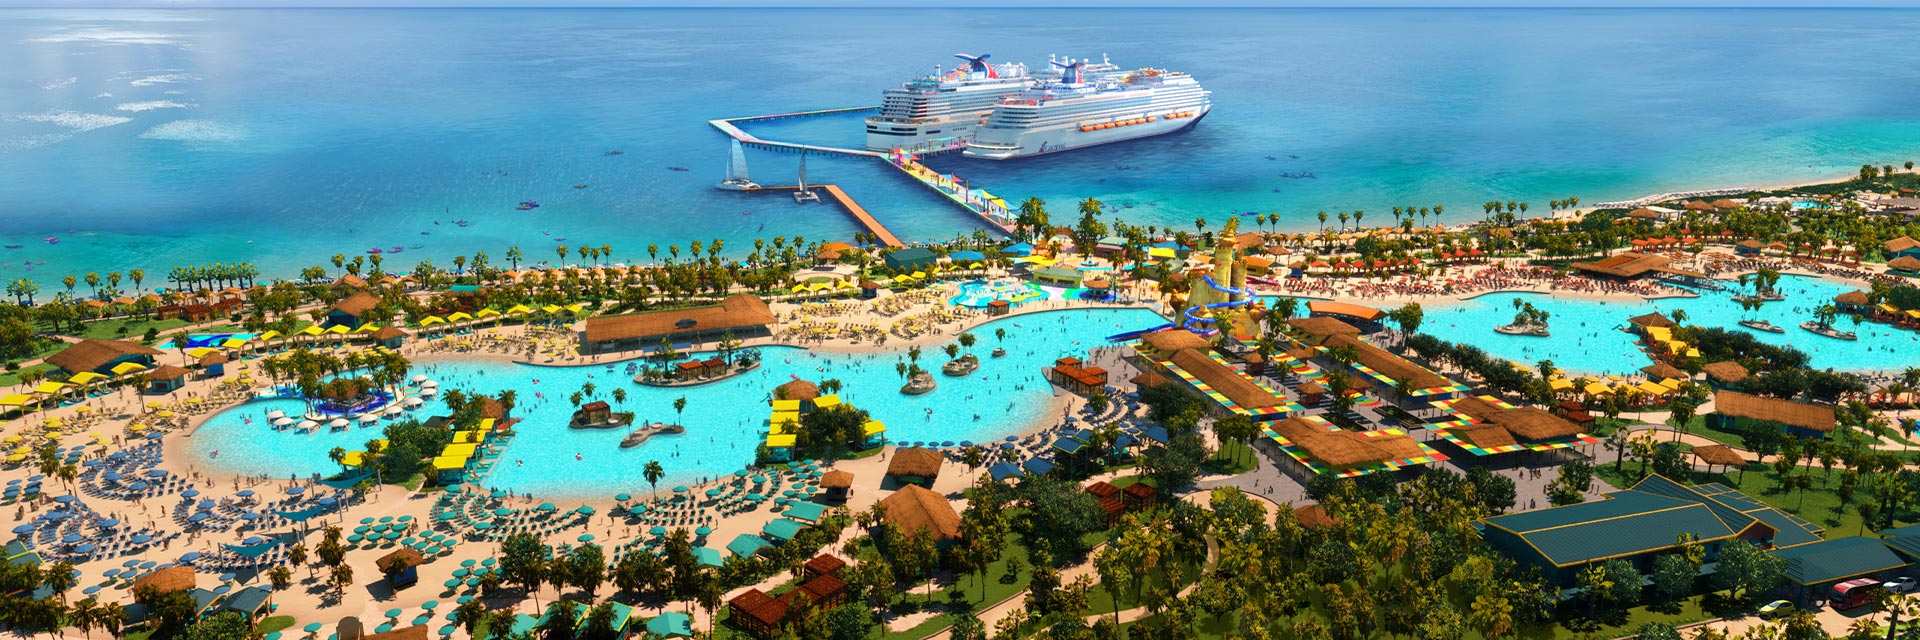 7-Day Western Caribbean Cruise from Miami - Carnival